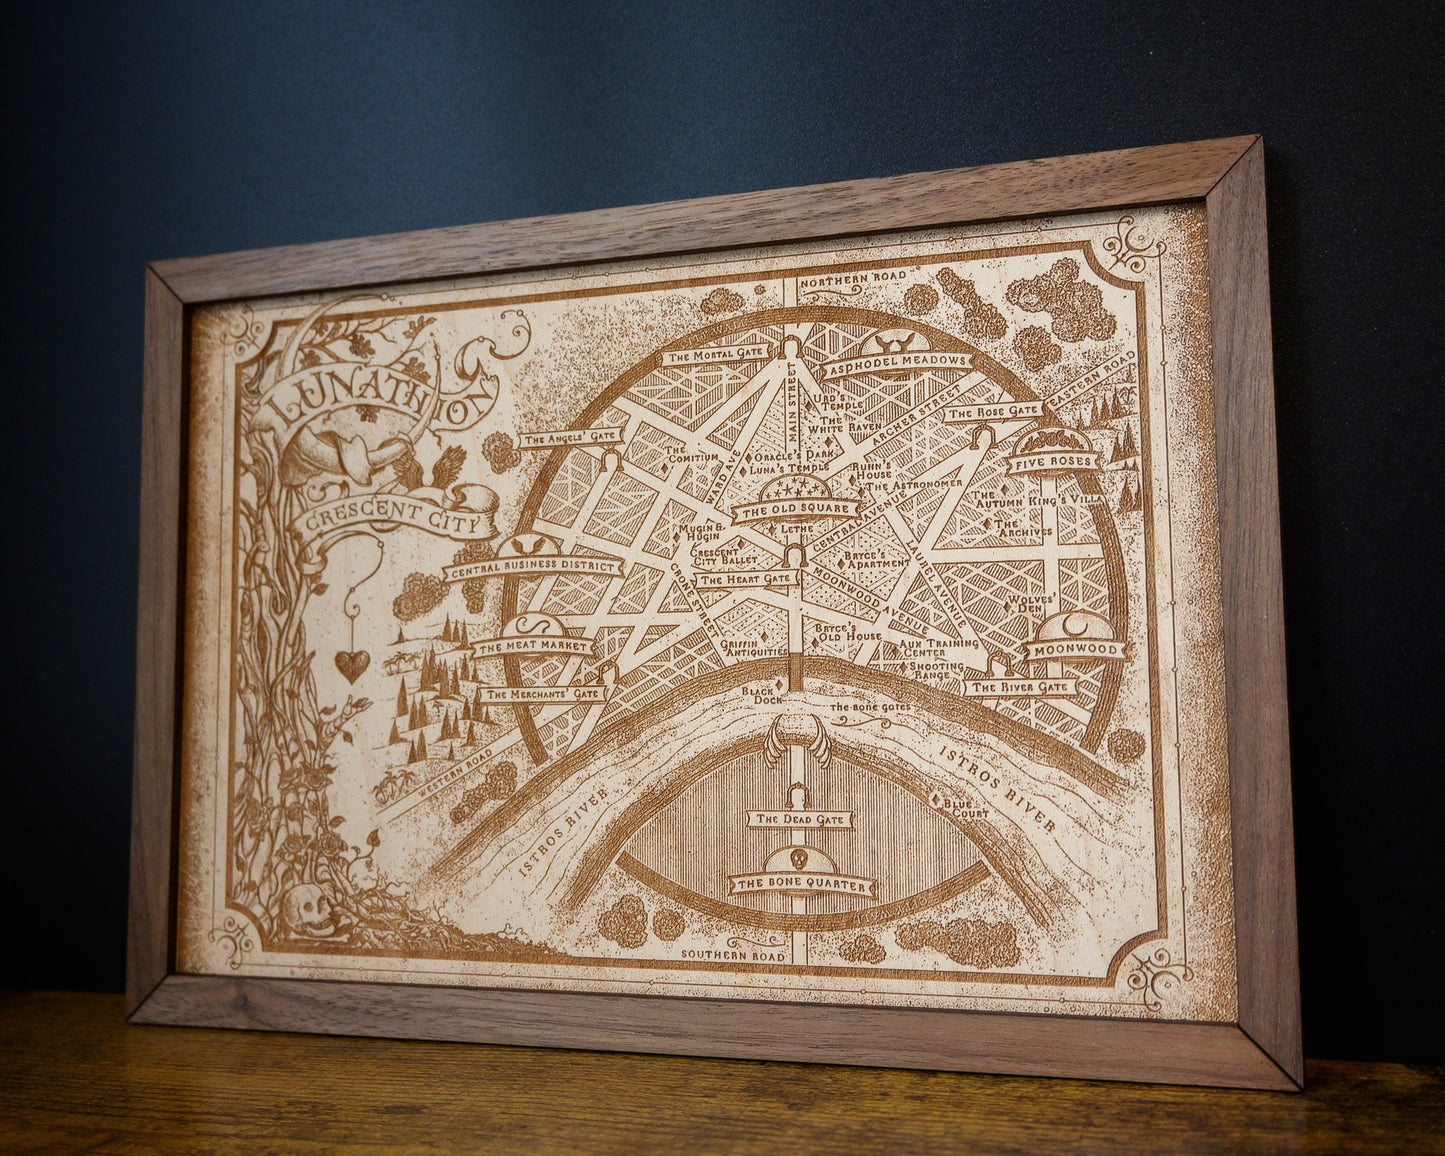 Crescent City Map, Fantasy Wood Engraved Map of Lunathion